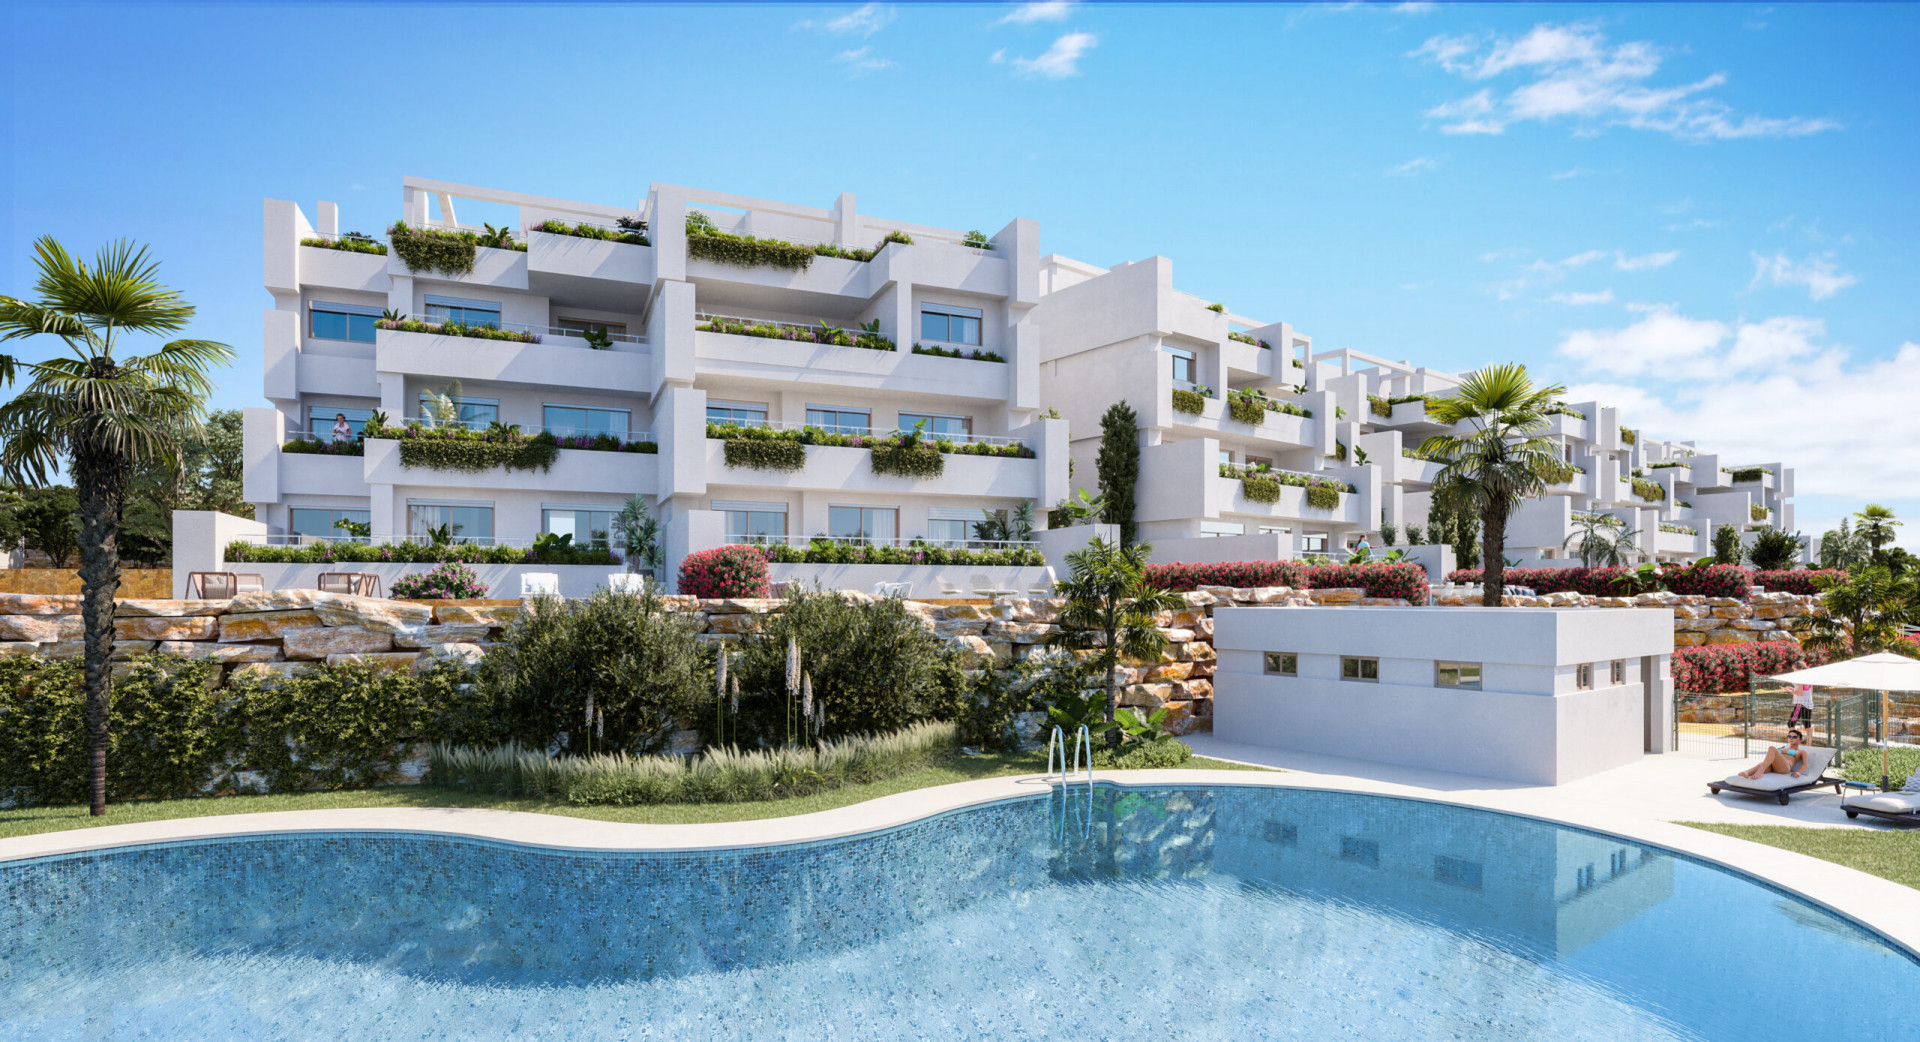 Aby Estepona: Apartments and duplex penthouses in a privileged location